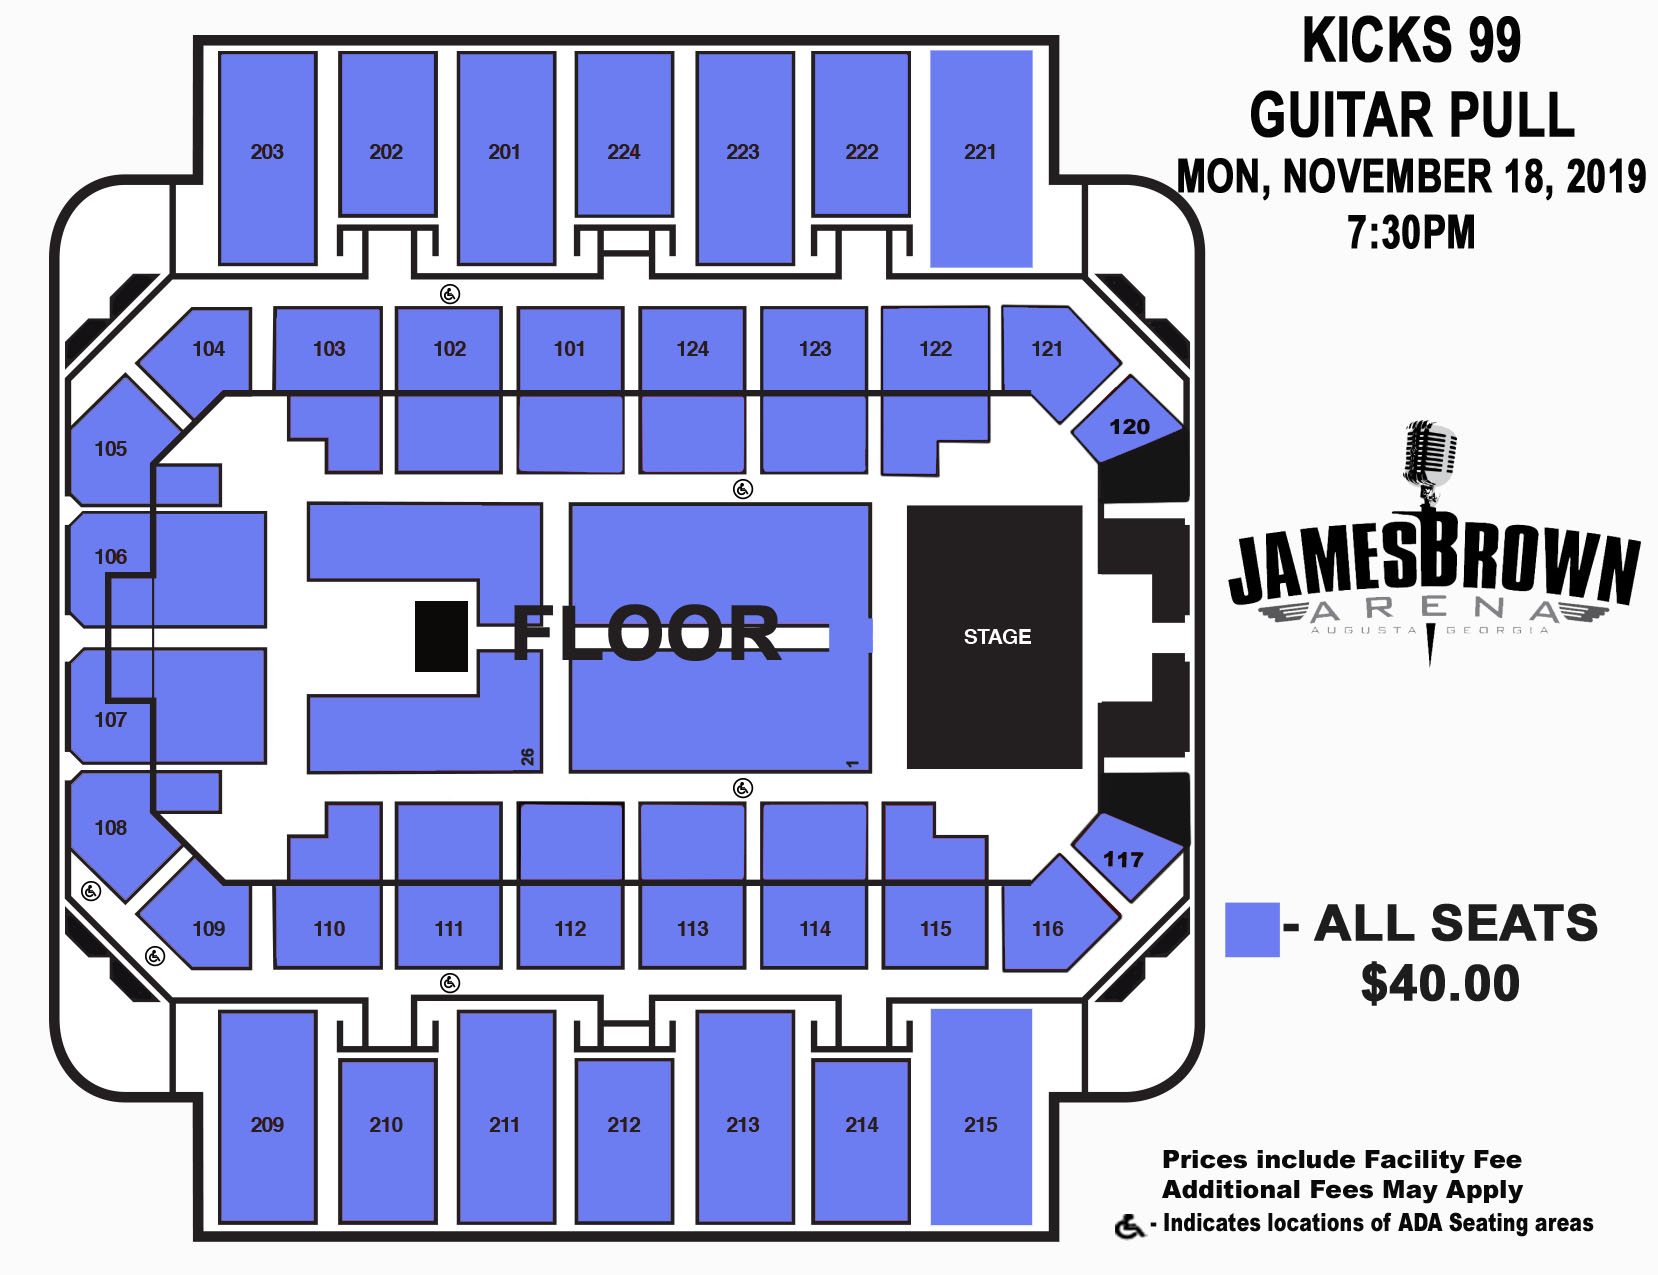 James Brown Arena Seating Chart For Guitar Pull